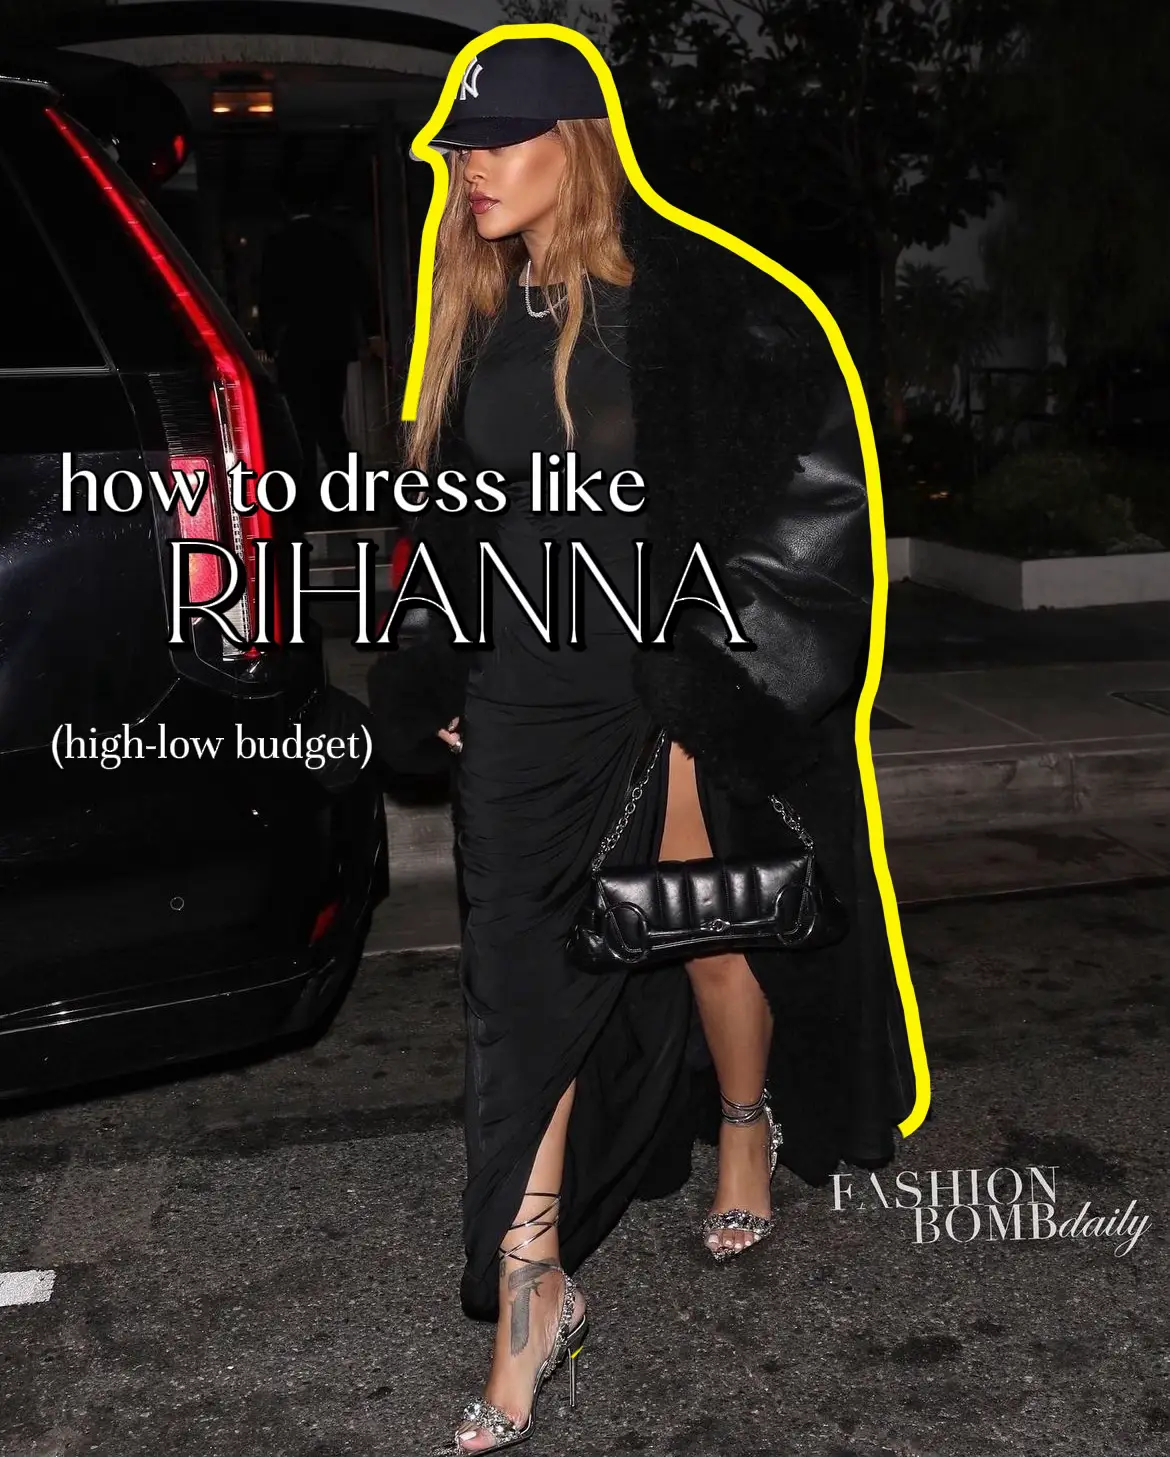 Rihanna's denim boots look like leg warmers, and honestly, is that trend  back yet?